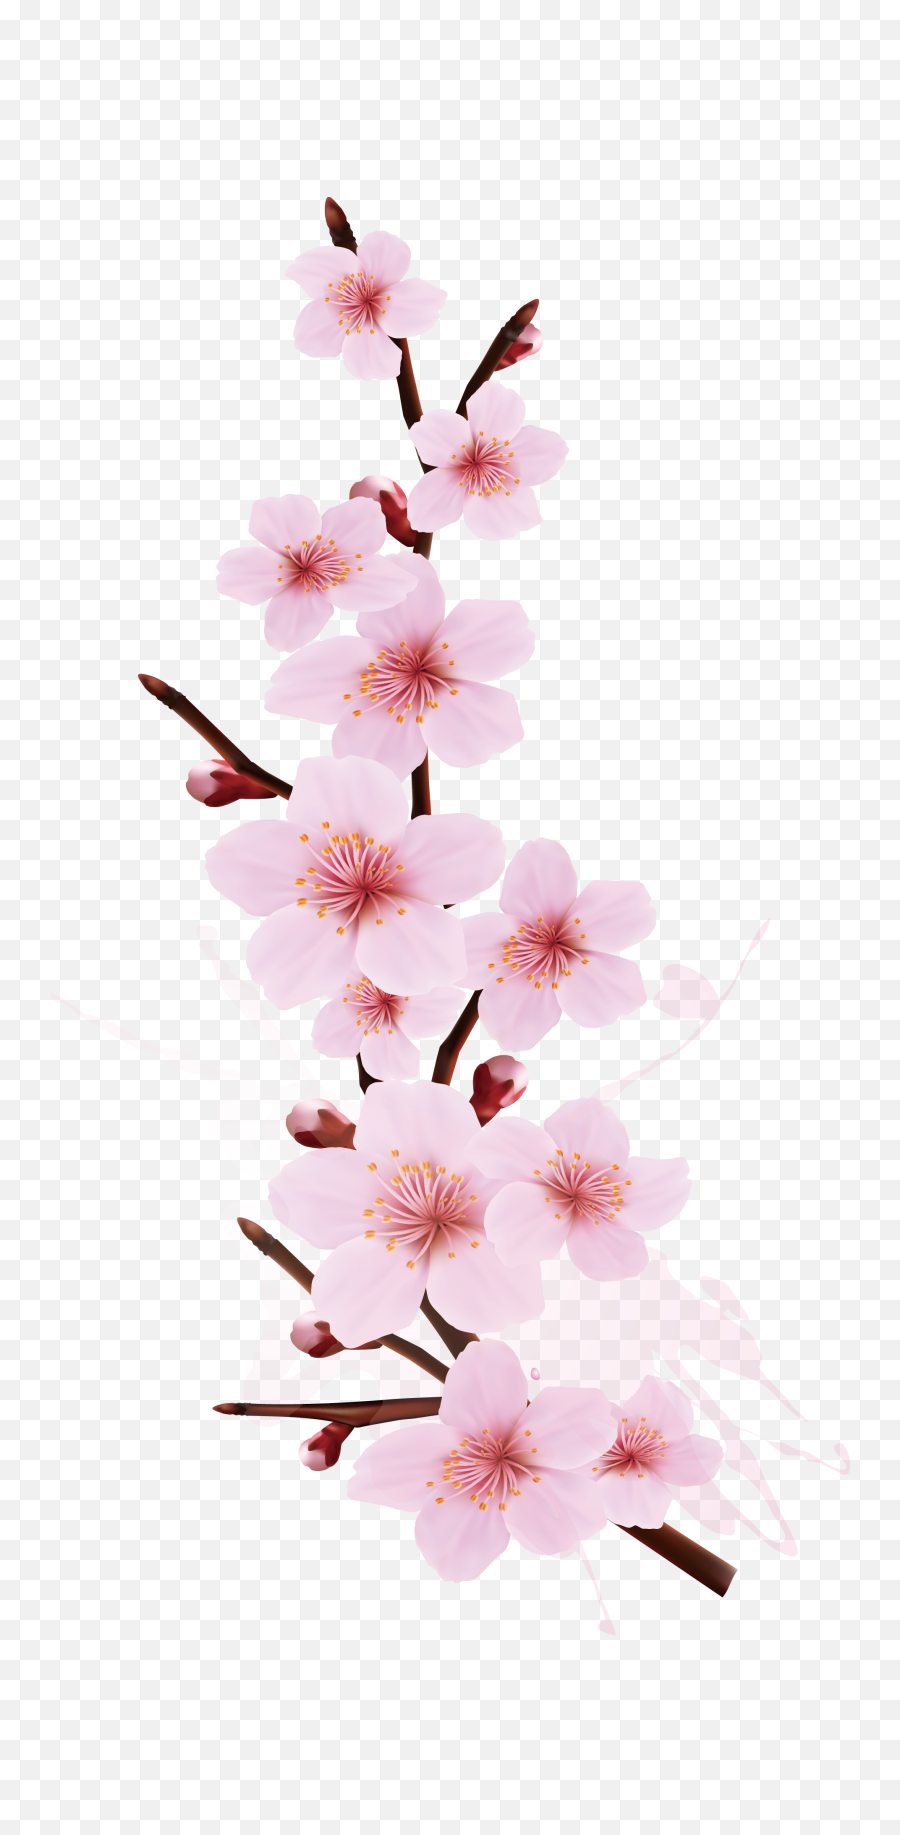 Download Cherry Blossom Branch Png - Transparent Cherry Blossom Design,Cherry Blossom Branch Png